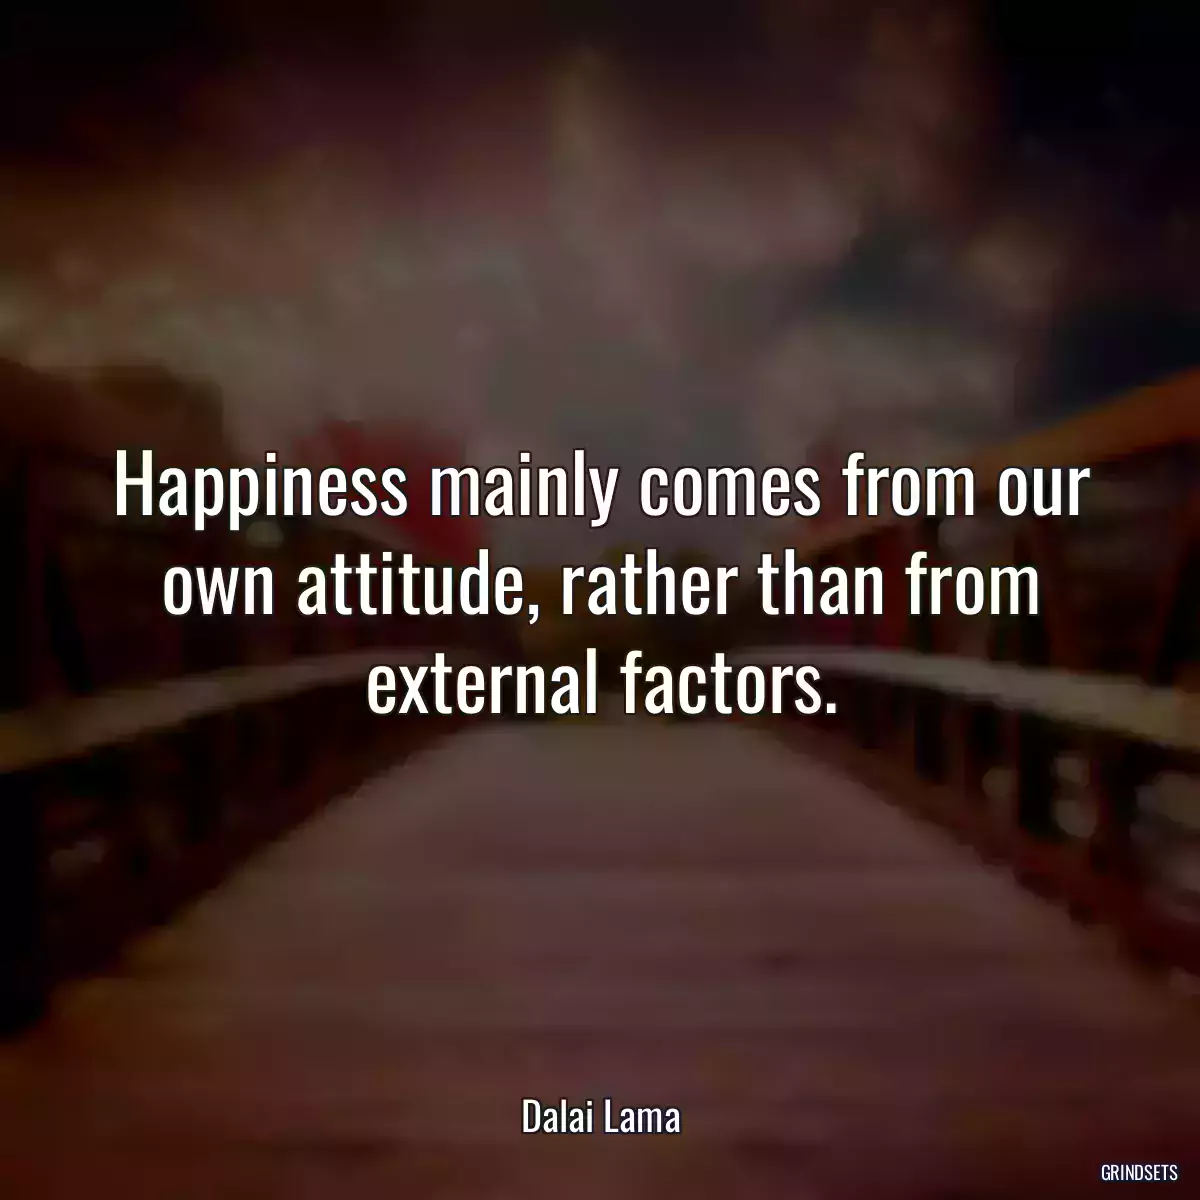 Happiness mainly comes from our own attitude, rather than from external factors.